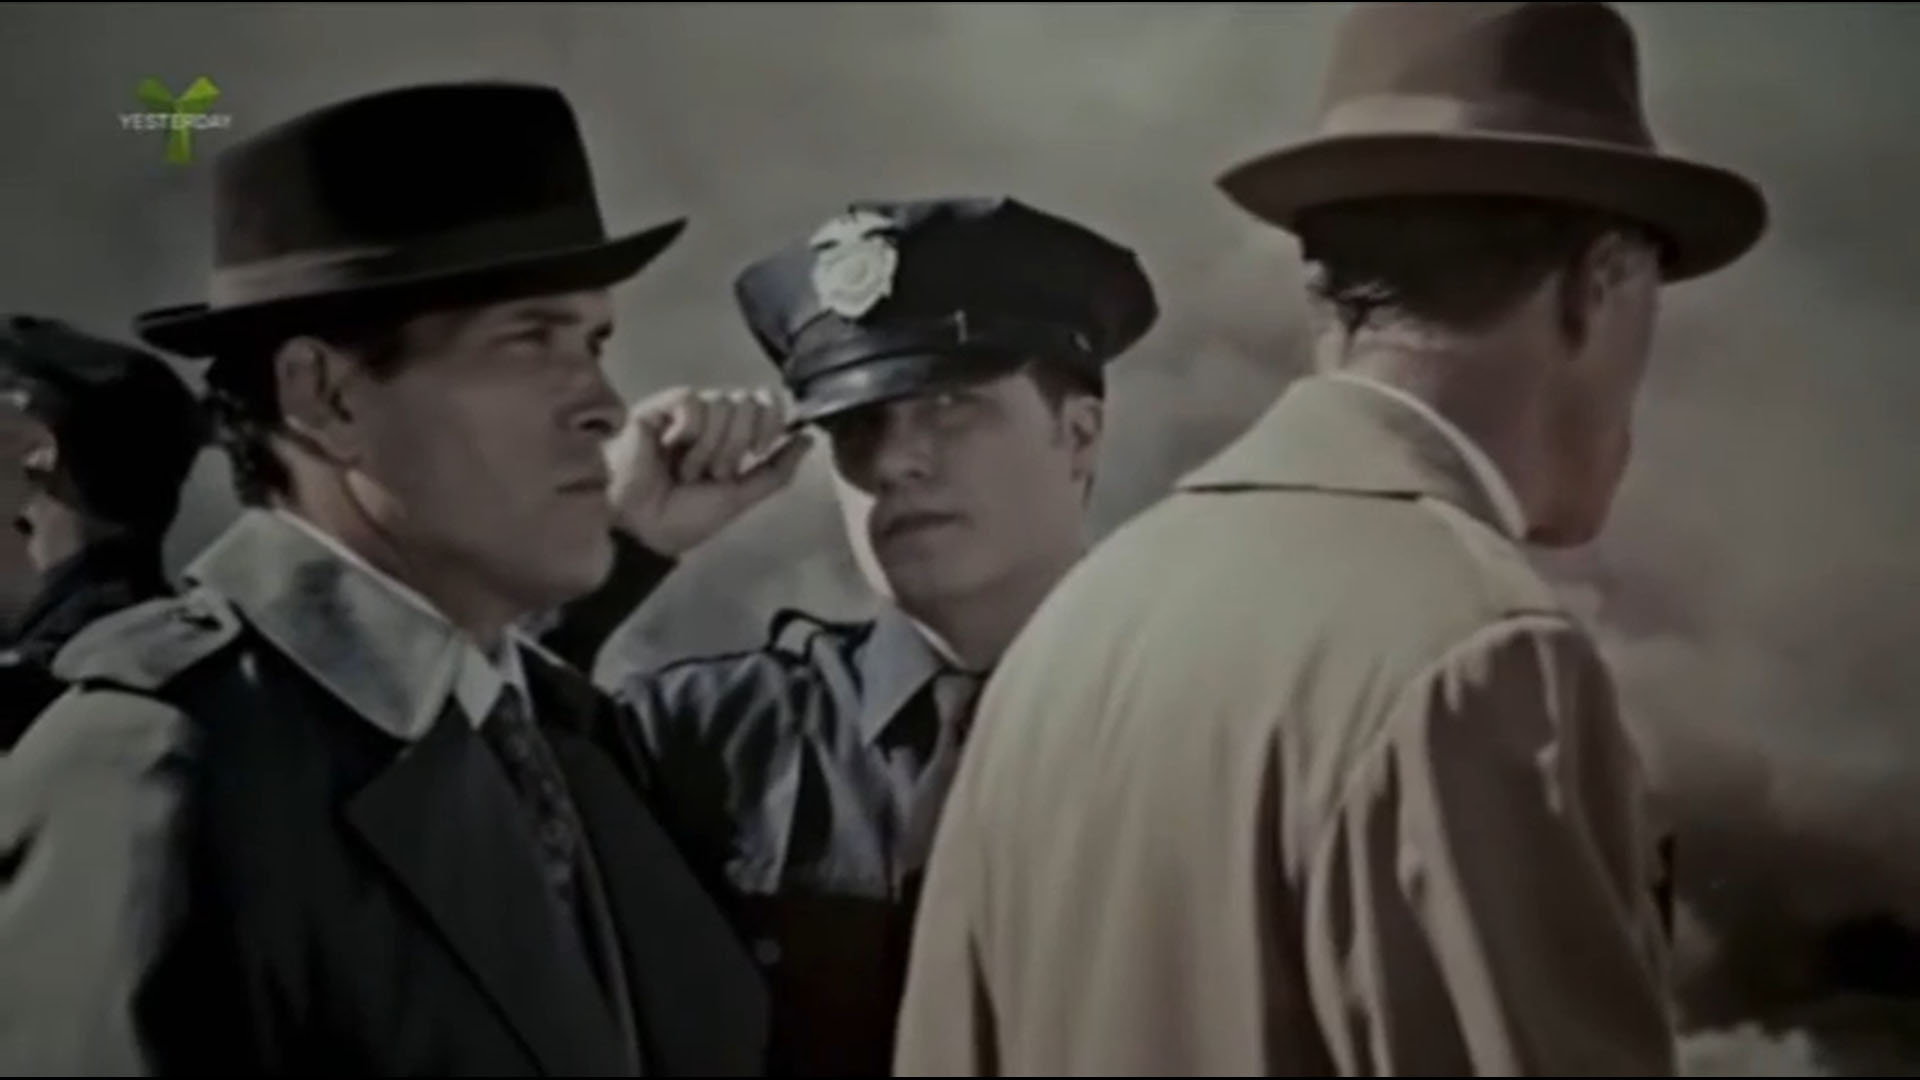 UFOs Declassified TV series Season 1, Episode 3 Played a uniformed LAPD officer from 1942.